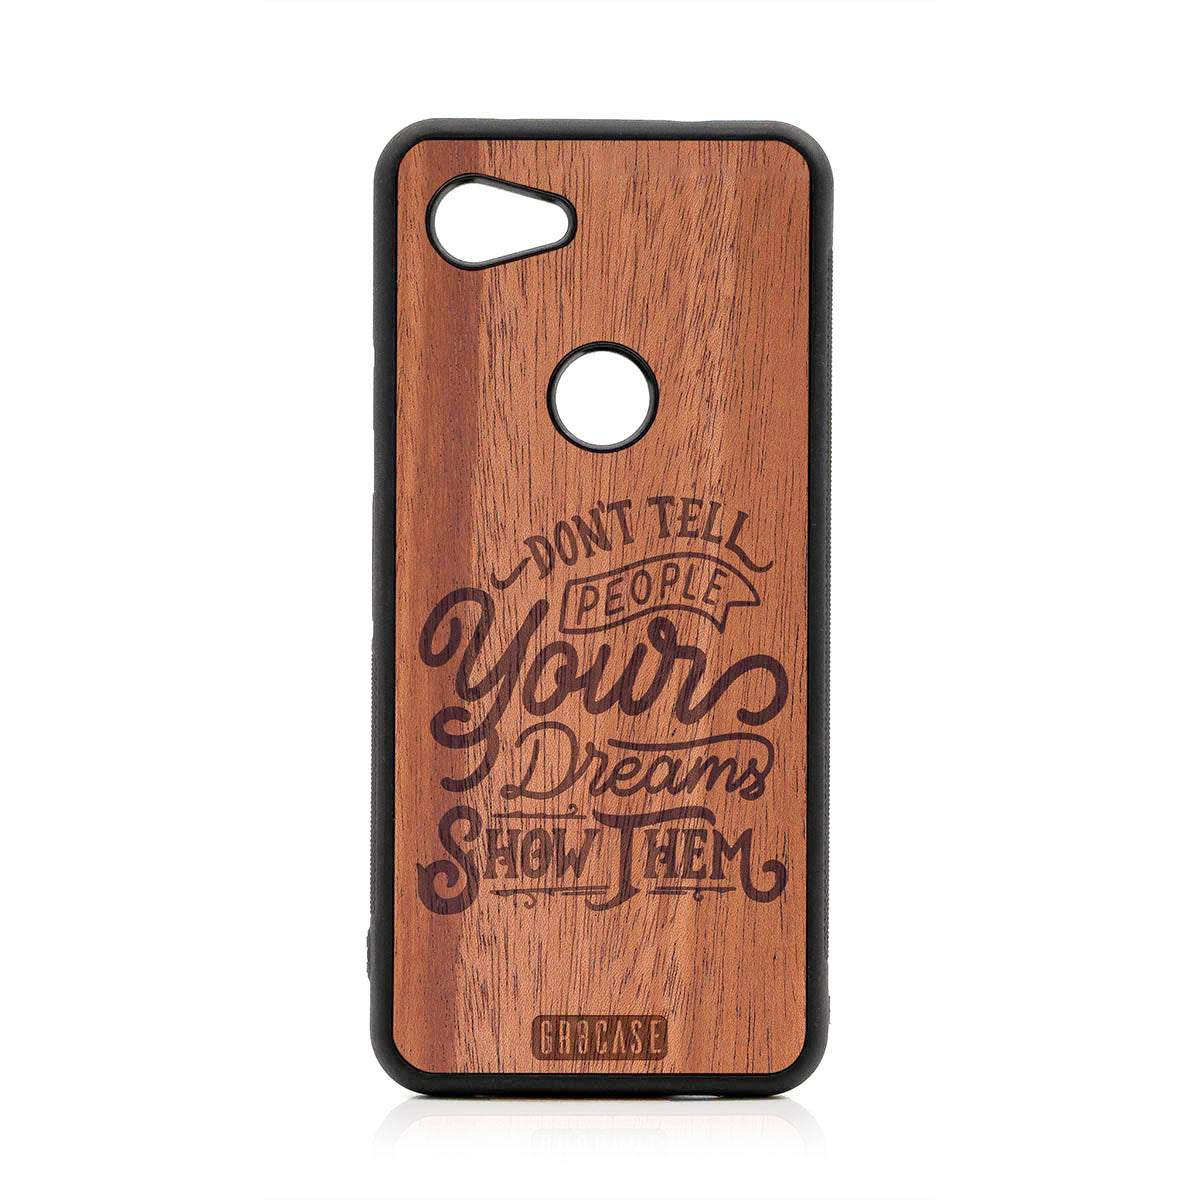 Don't Tell People Your Dreams Show Them Design Wood Case For Google Pixel 3A XL by GR8CASE